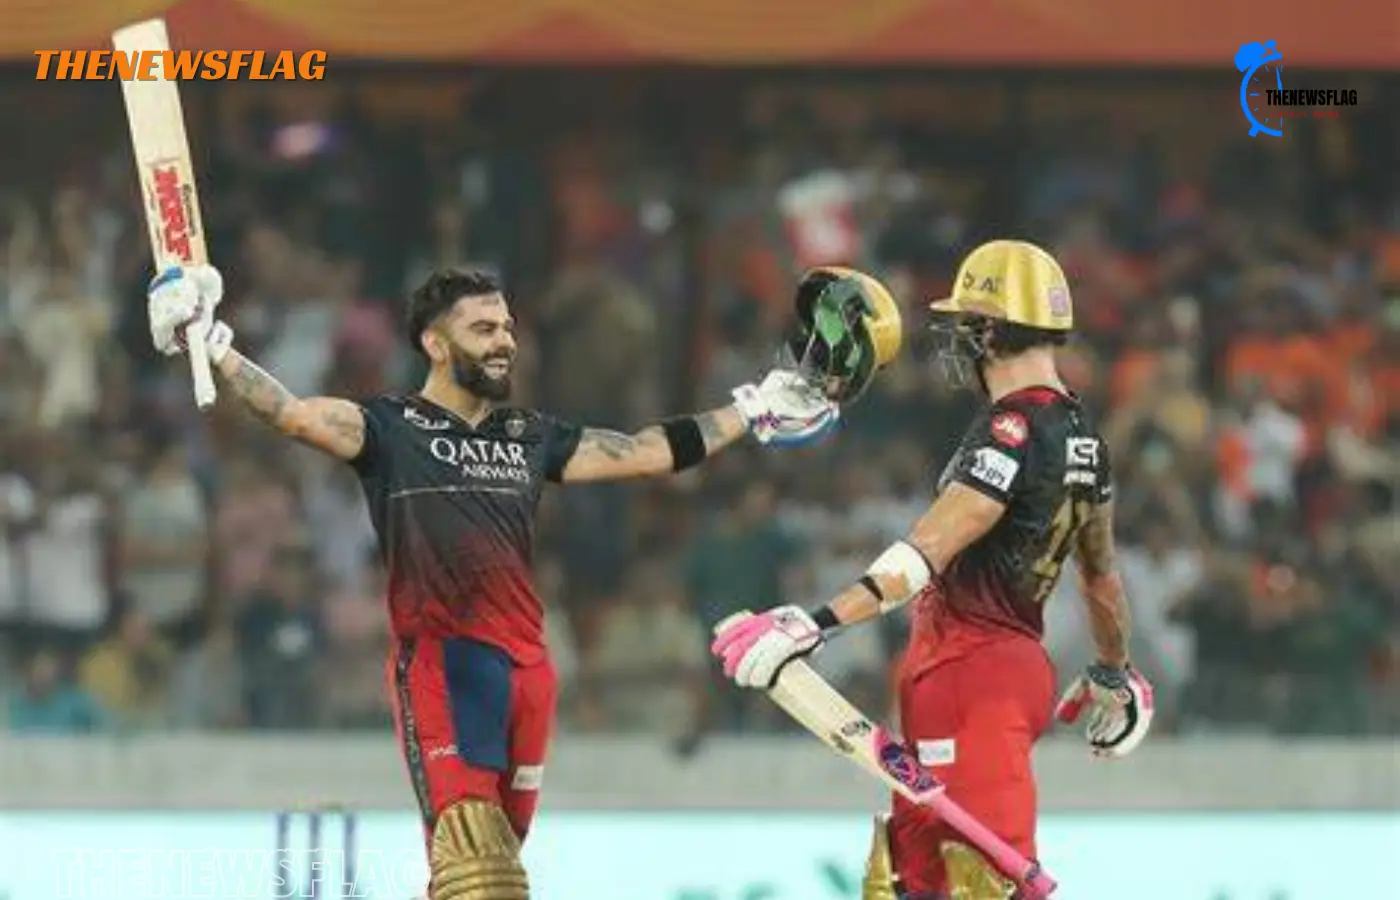 Dream11 for RCB vs. PBKS: Livingstone, Bairstow, Kohli, du Plessis; this is the team of 11 that will make you wealthy.